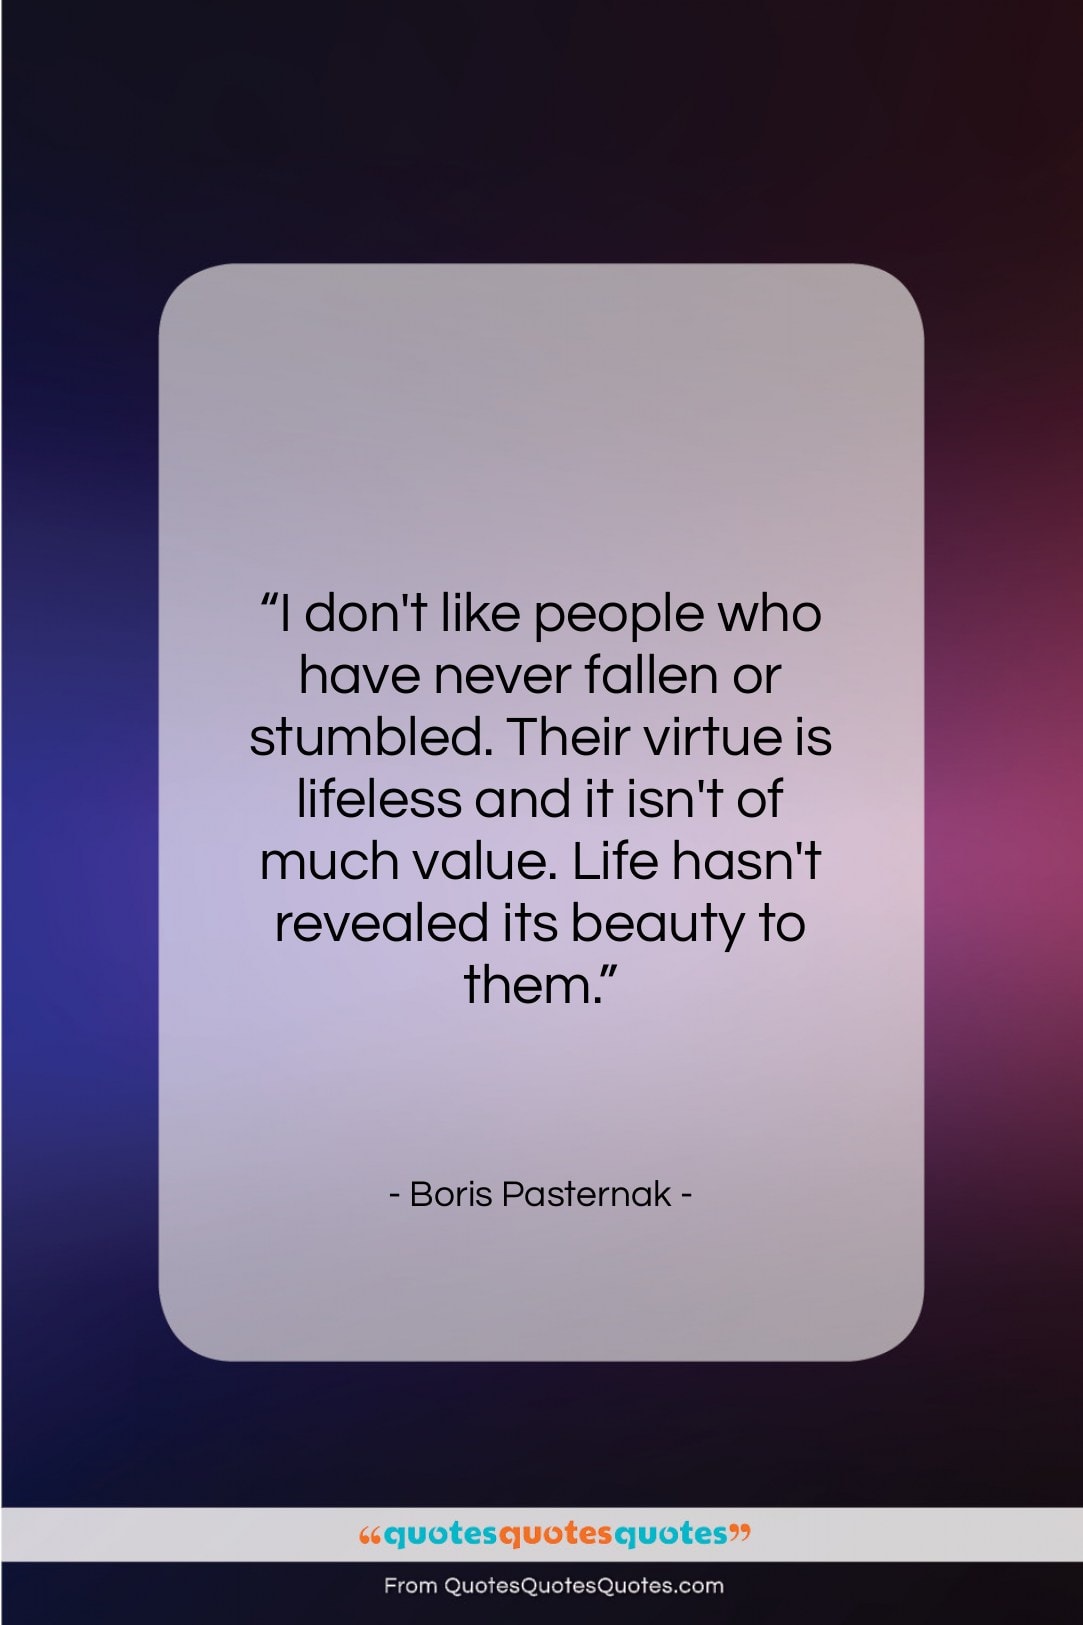 Boris Pasternak quote: “I don’t like people who have never…”- at QuotesQuotesQuotes.com